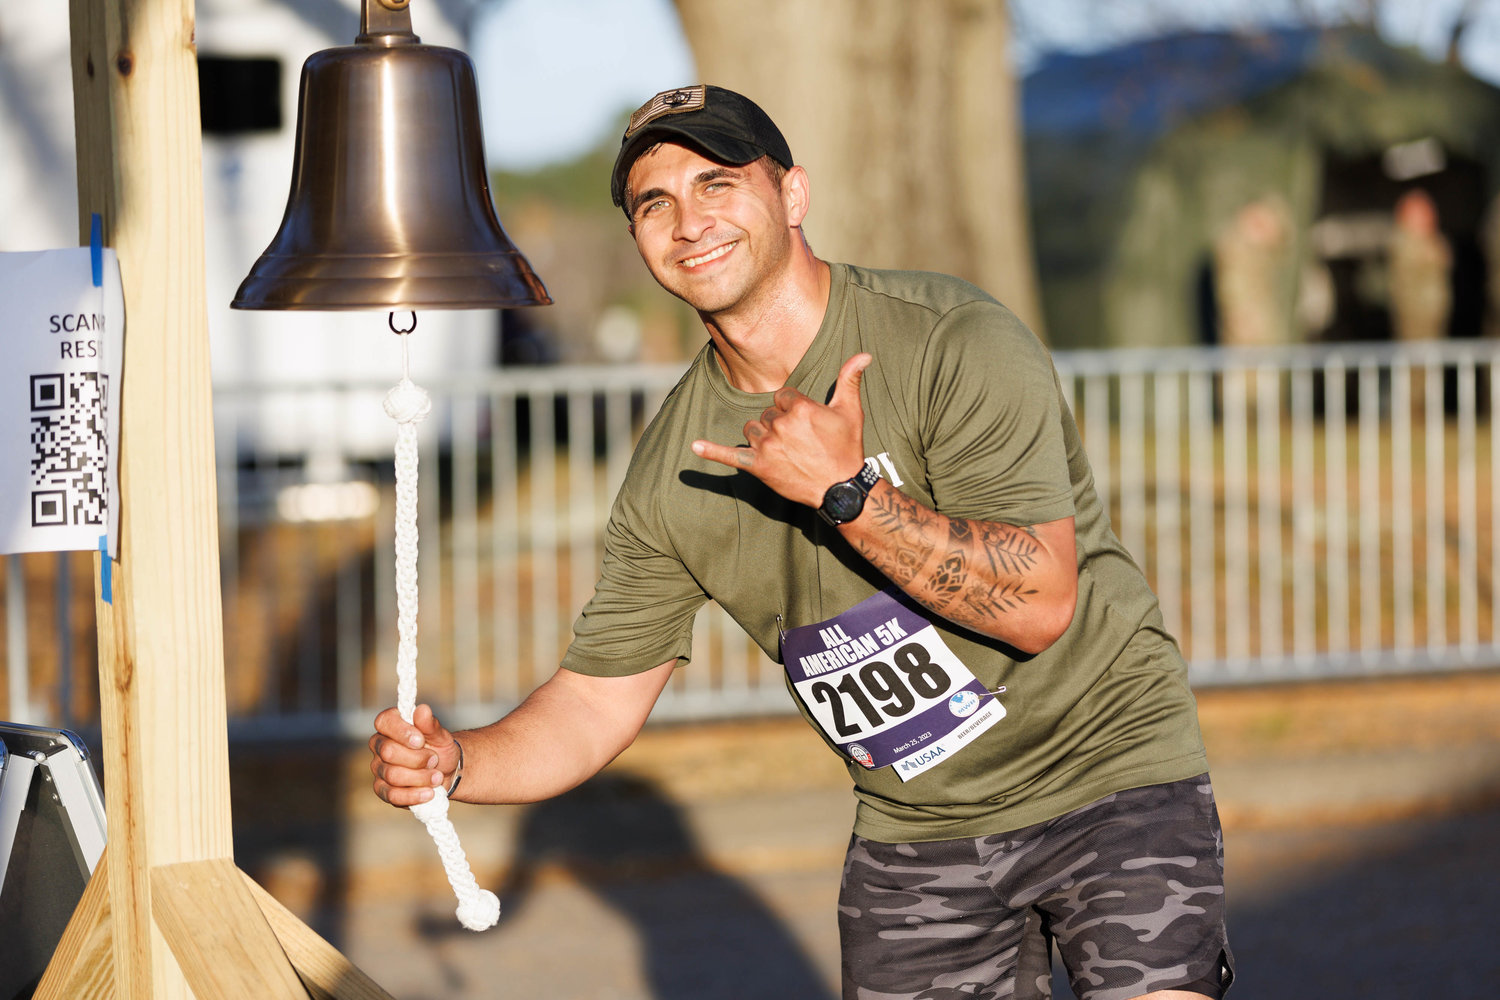 Jon Rickettes rings the bell after completing the All American Race on Fort Bragg on March 23, 2023.  Tony Wooten/CityView Media